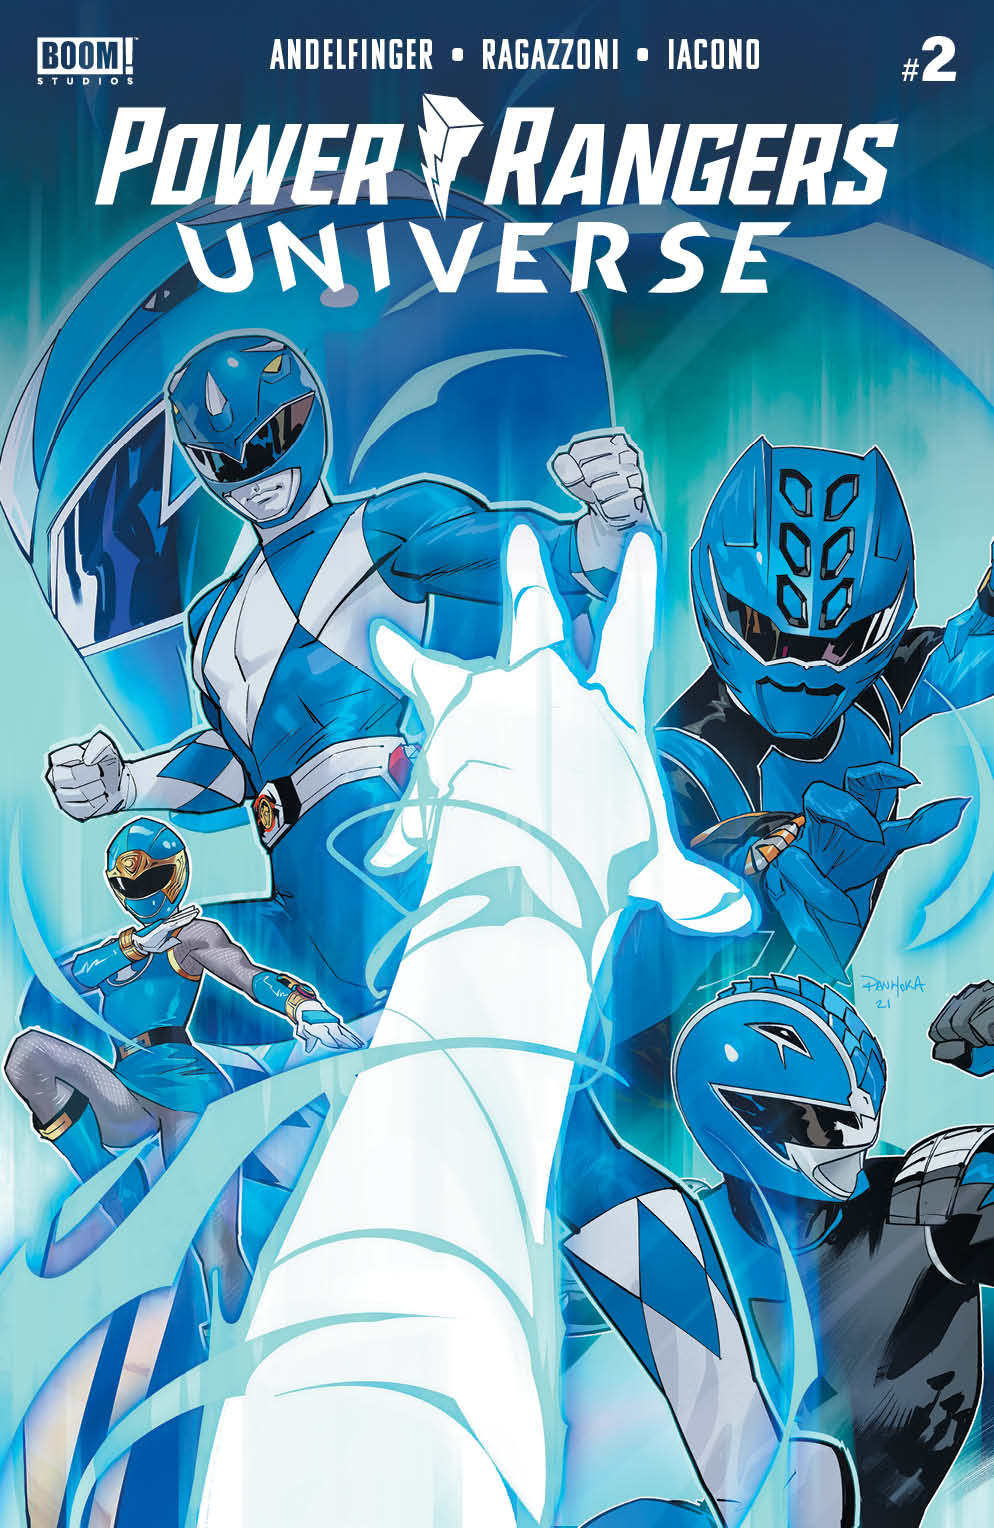 Power Rangers Universe #2 Cover A Mora (Of 6)